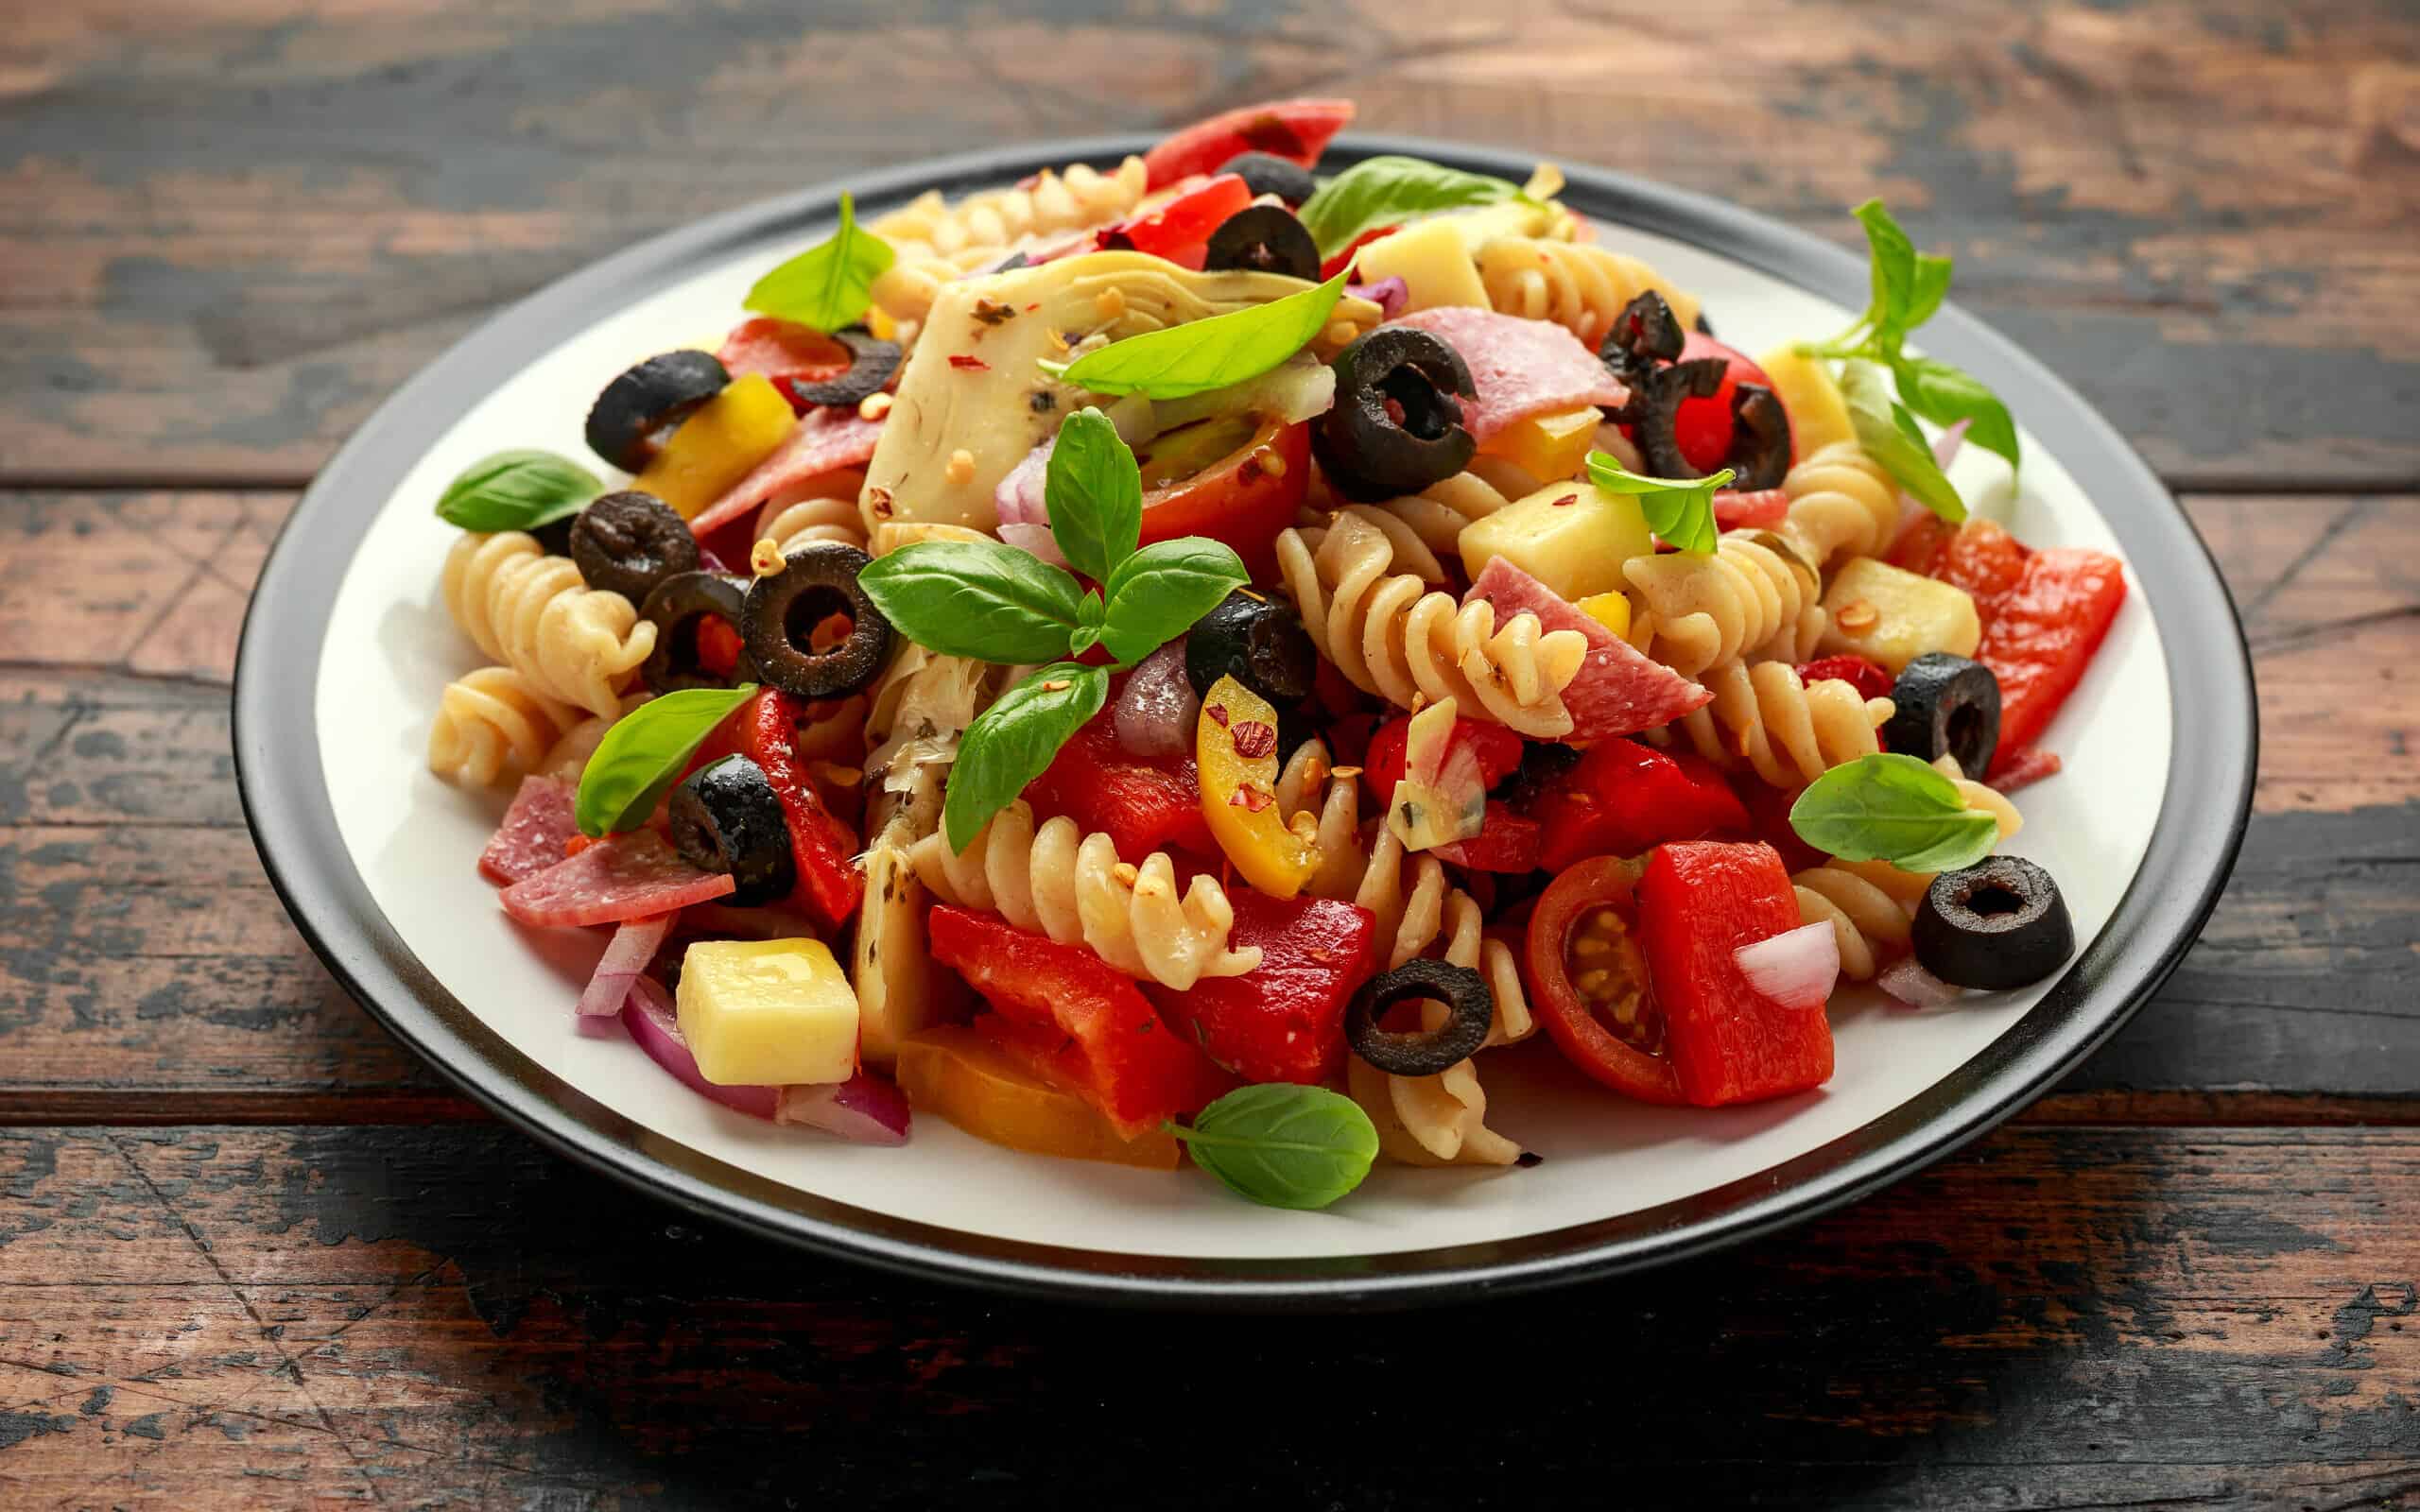 Antipasto salad with pasta, tomato, olives, red onion, bell pepper, salami, cheese artichoke and basil on wooden table